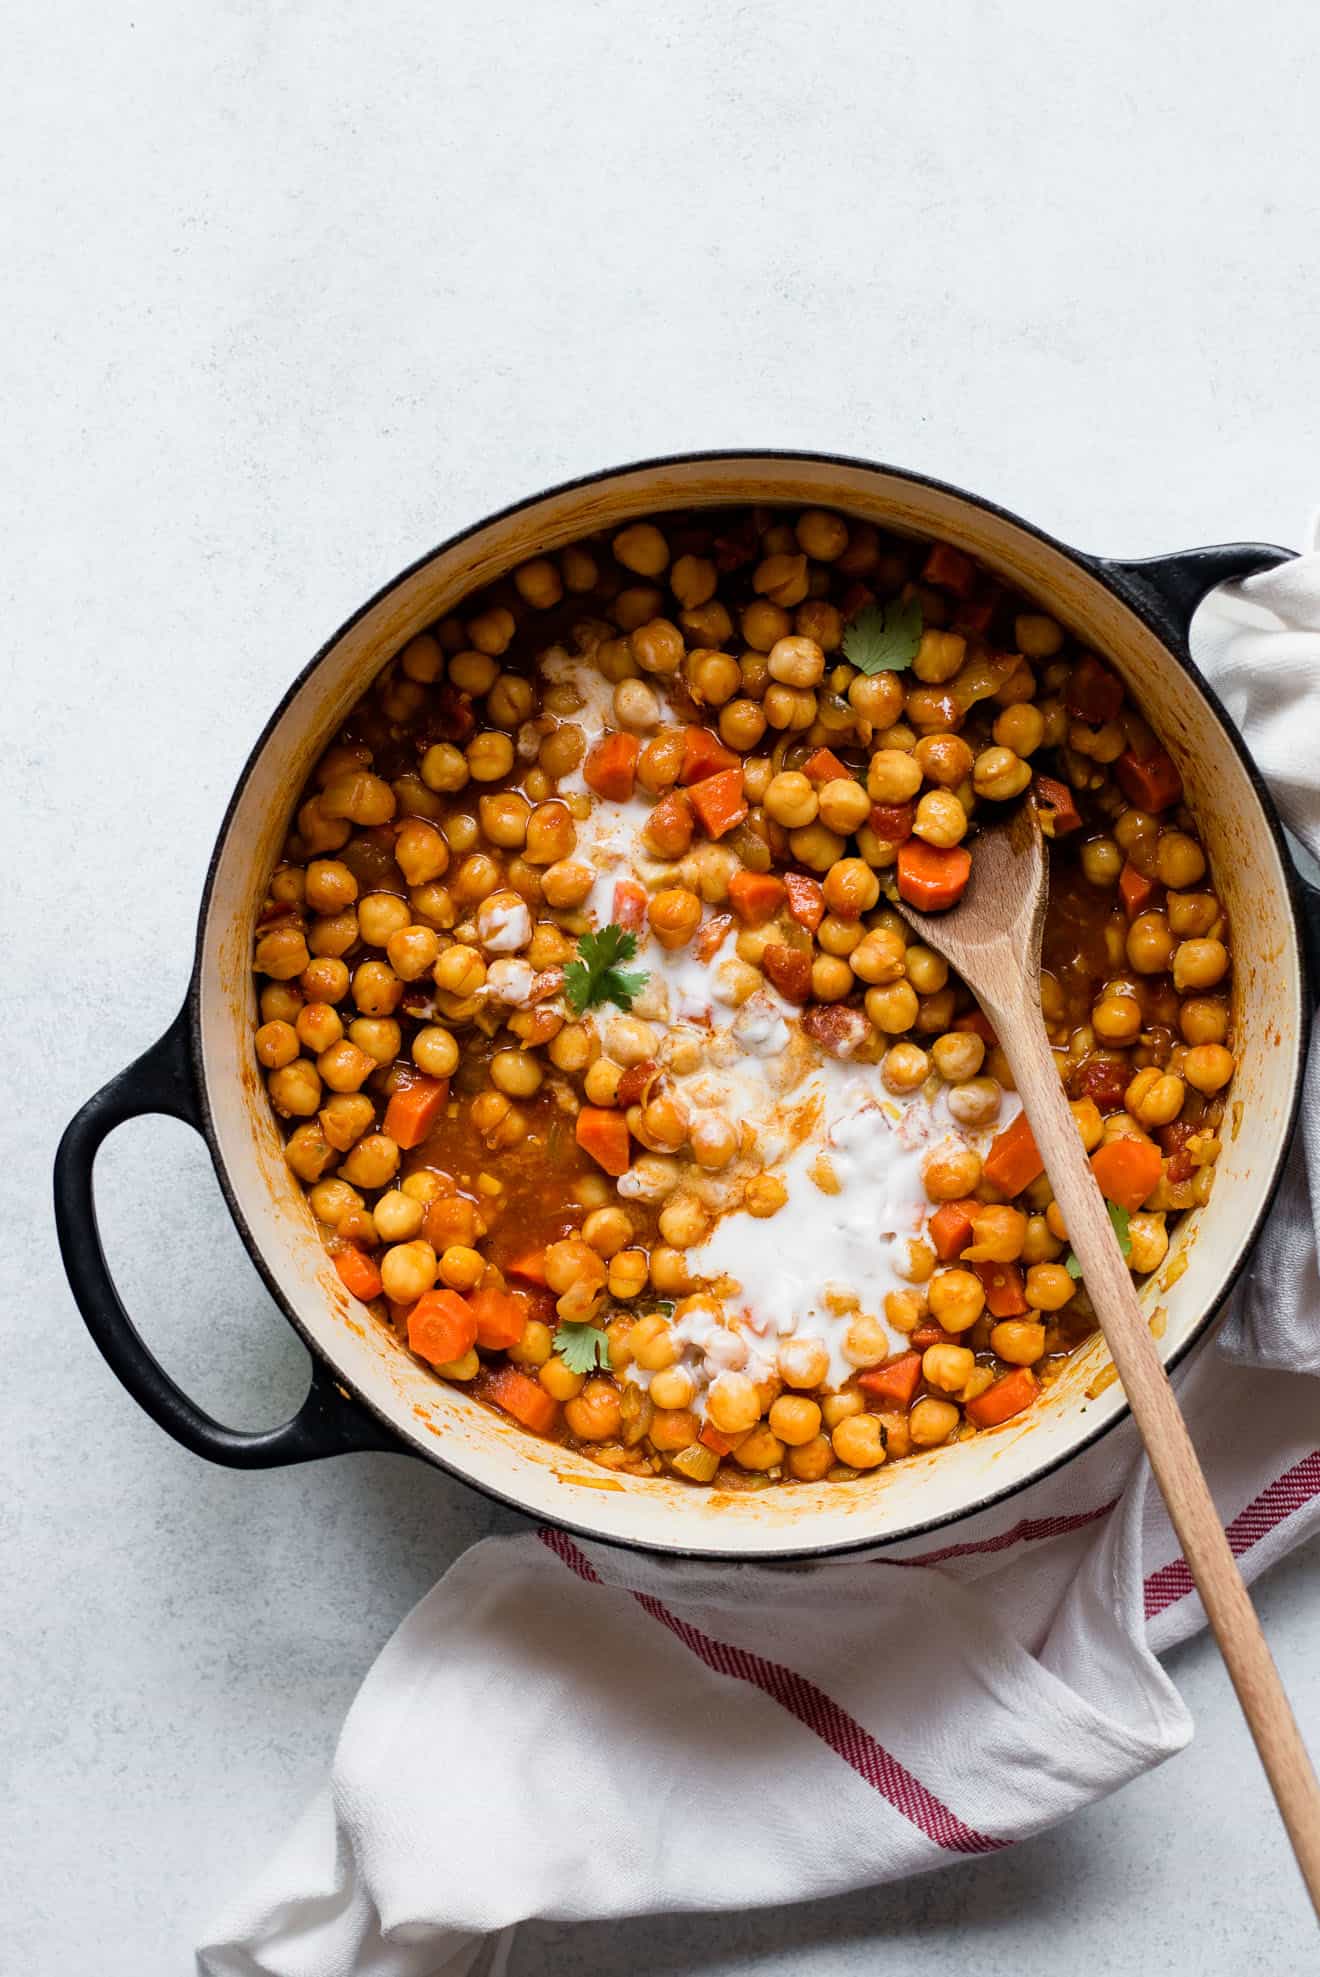 #VEGAN Pot of Curried Chickpeas with Mint & Cilantro Chutney - a tasty, easy dinner!